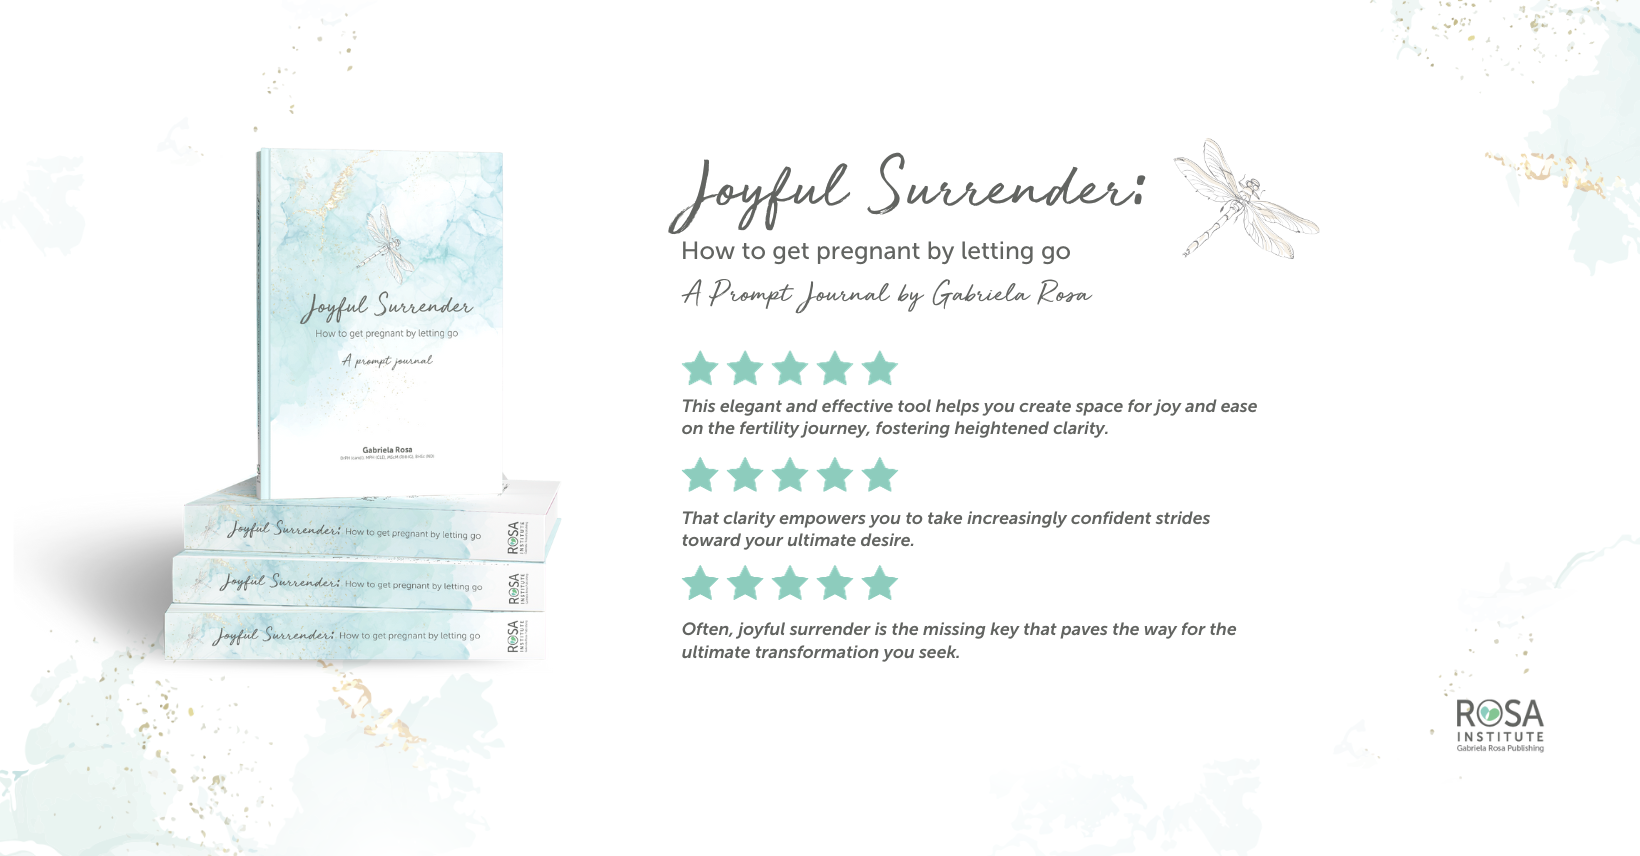 Joyful Surrender: How to get pregnant by letting go. A prompt journal by Gabriela Rosa.